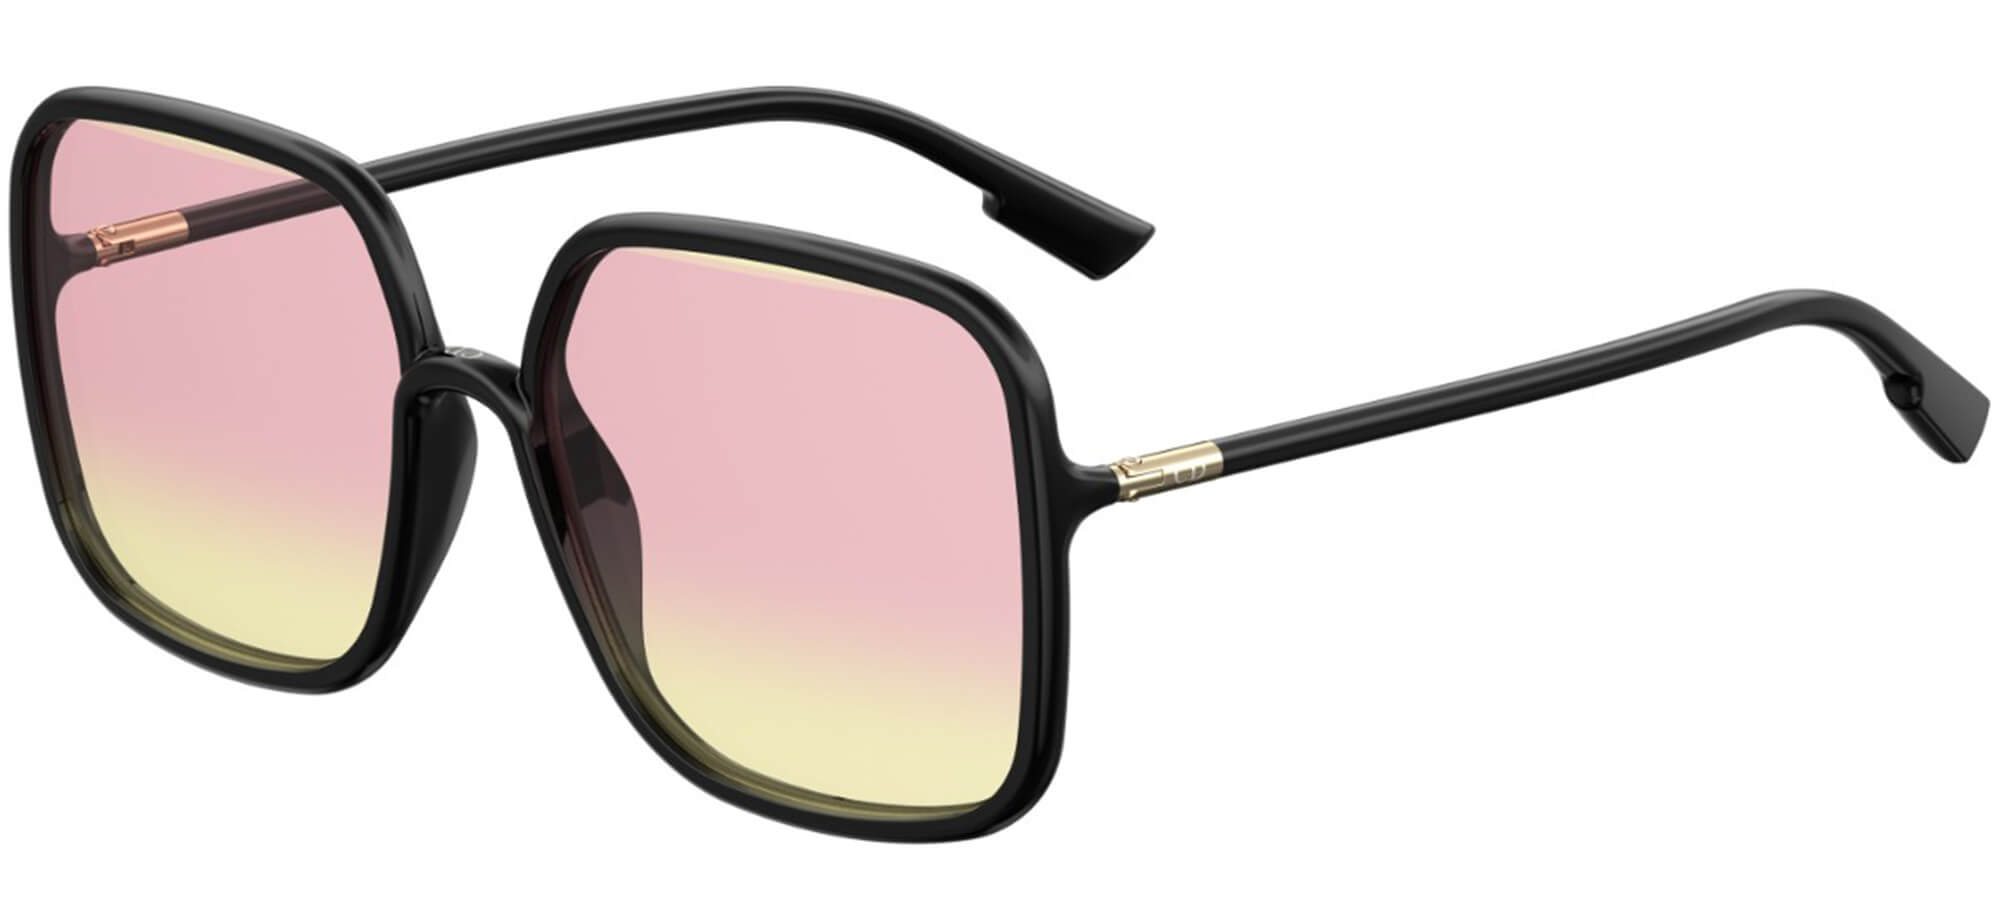 DiorSO STELLAIRE 1Black/pink Shaded (807/VC)